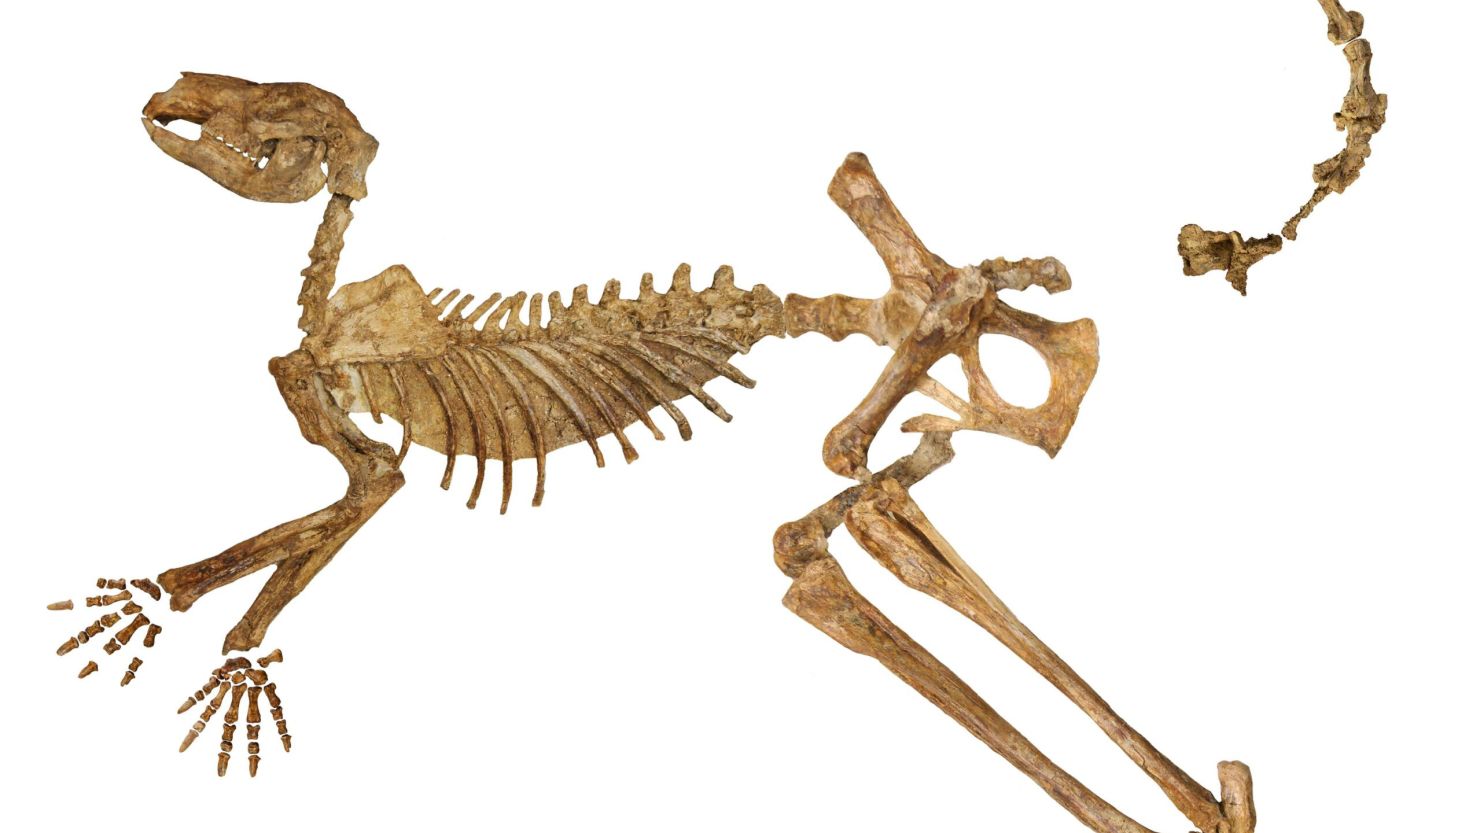 A near-complete fossil skeleton of Protemnodon viator